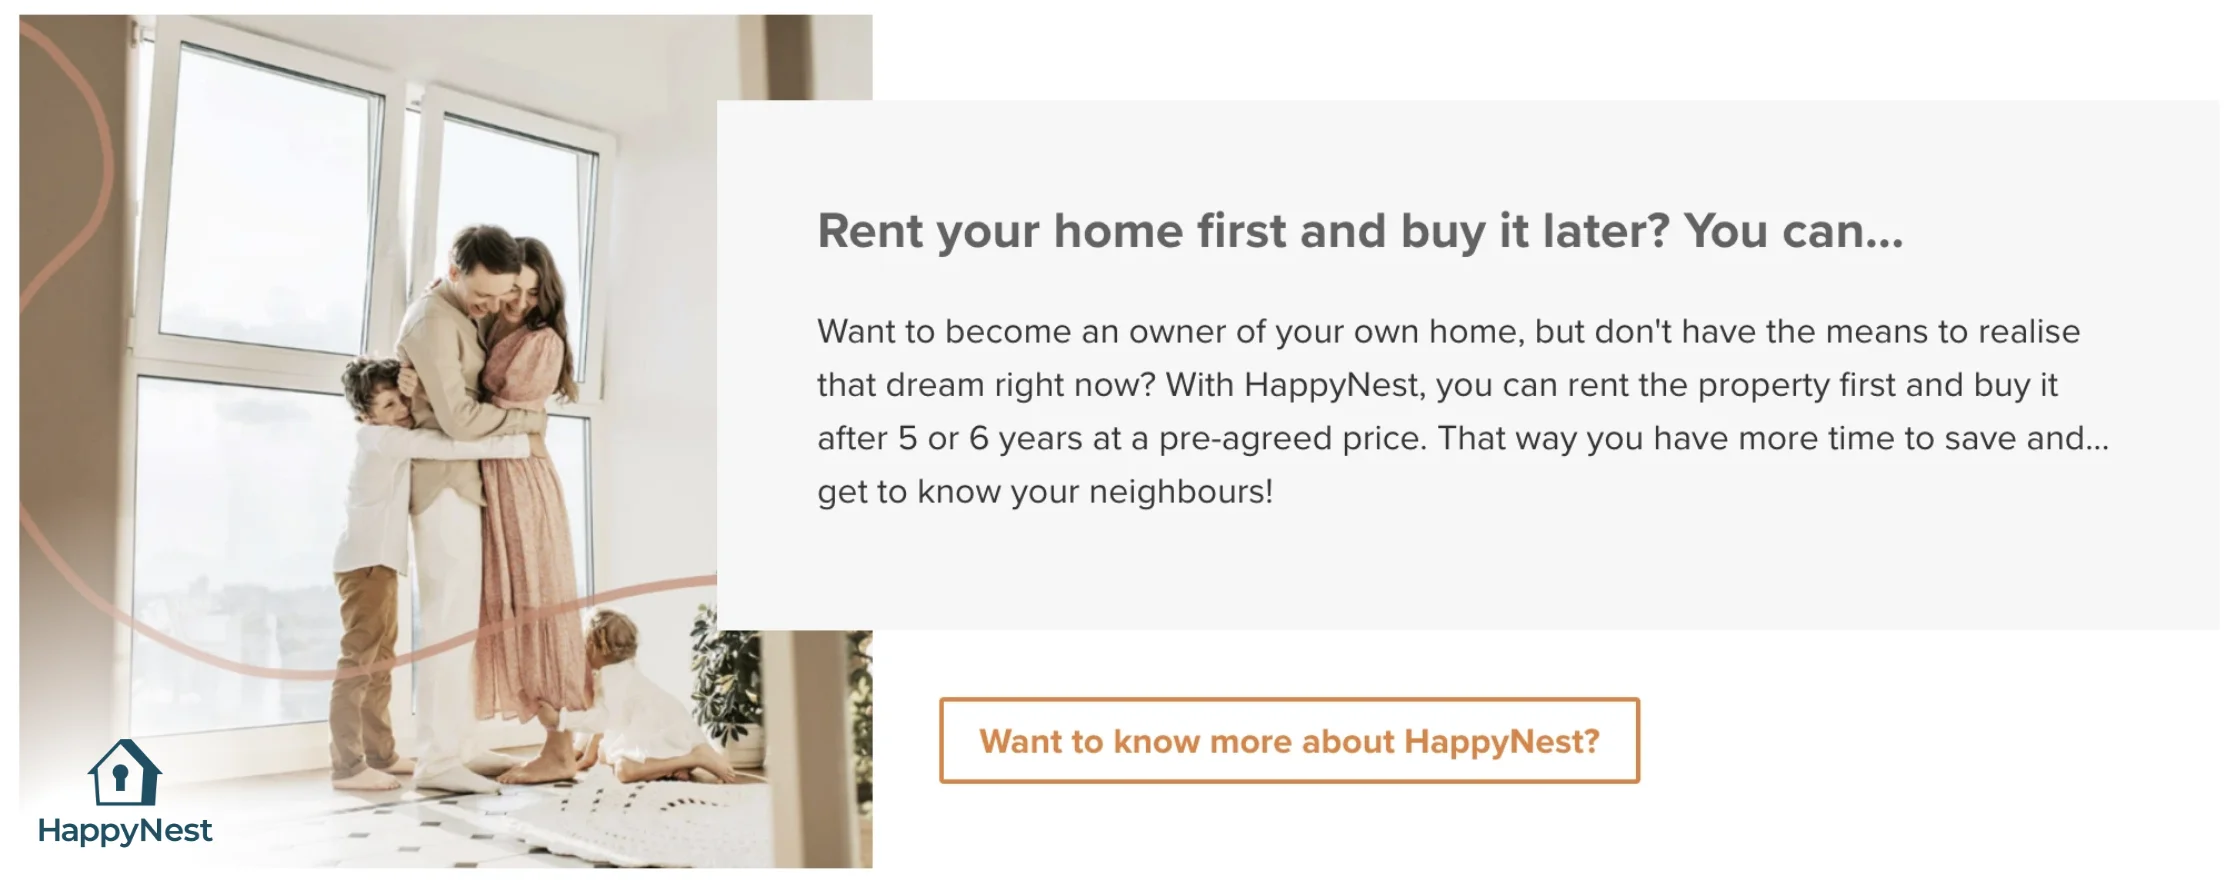 Rent your home first and buy it later? You can...